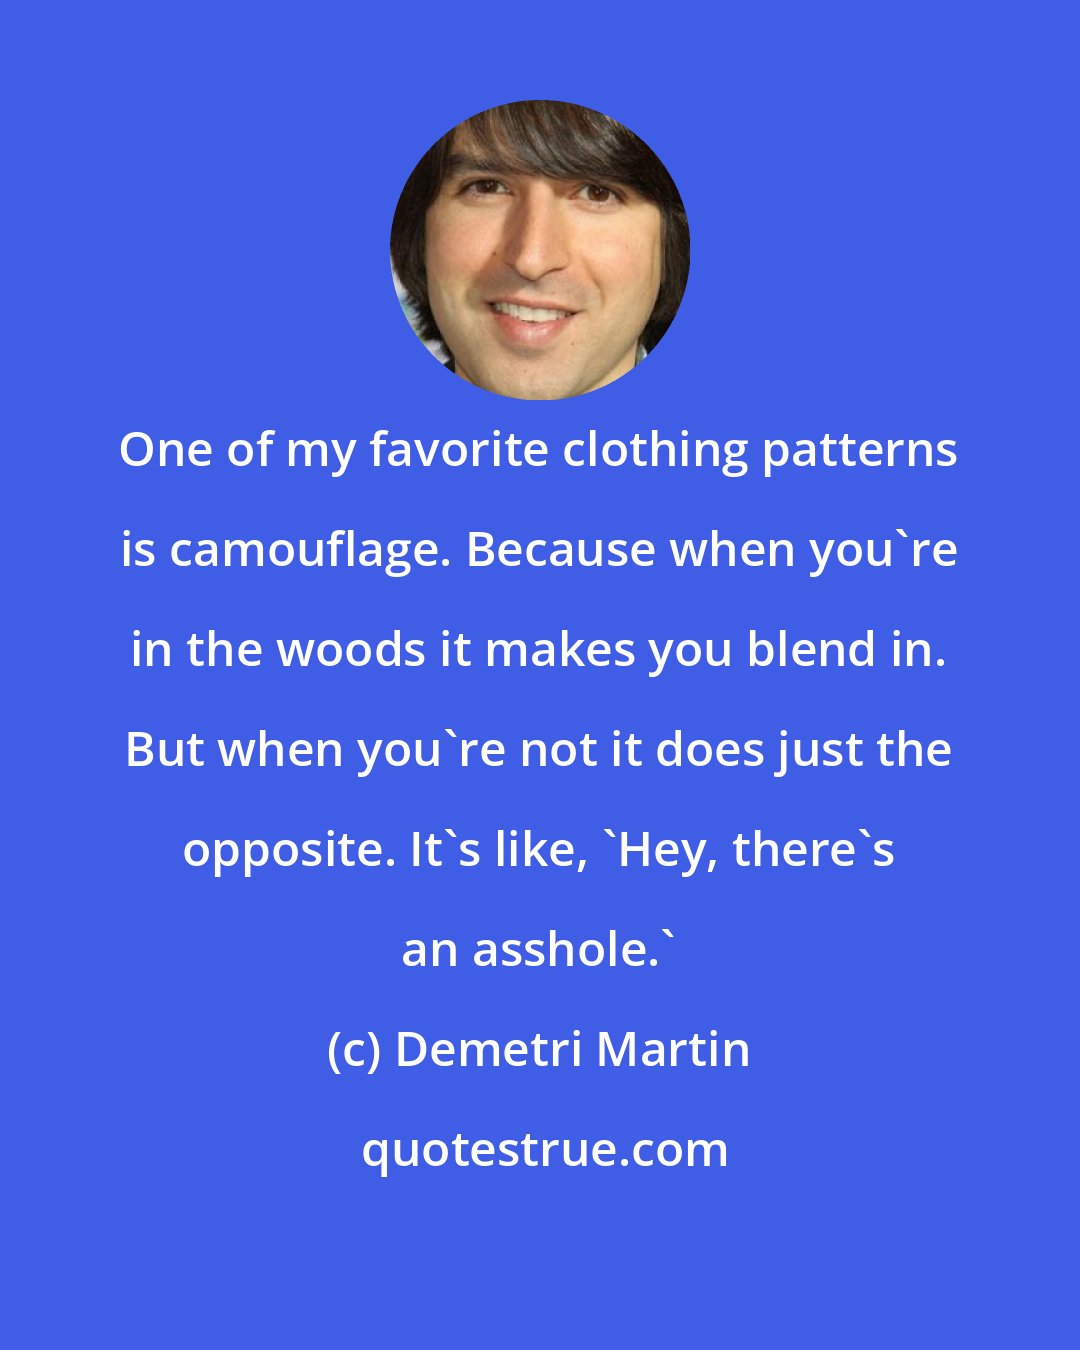 Demetri Martin: One of my favorite clothing patterns is camouflage. Because when you're in the woods it makes you blend in. But when you're not it does just the opposite. It's like, 'Hey, there's an asshole.'